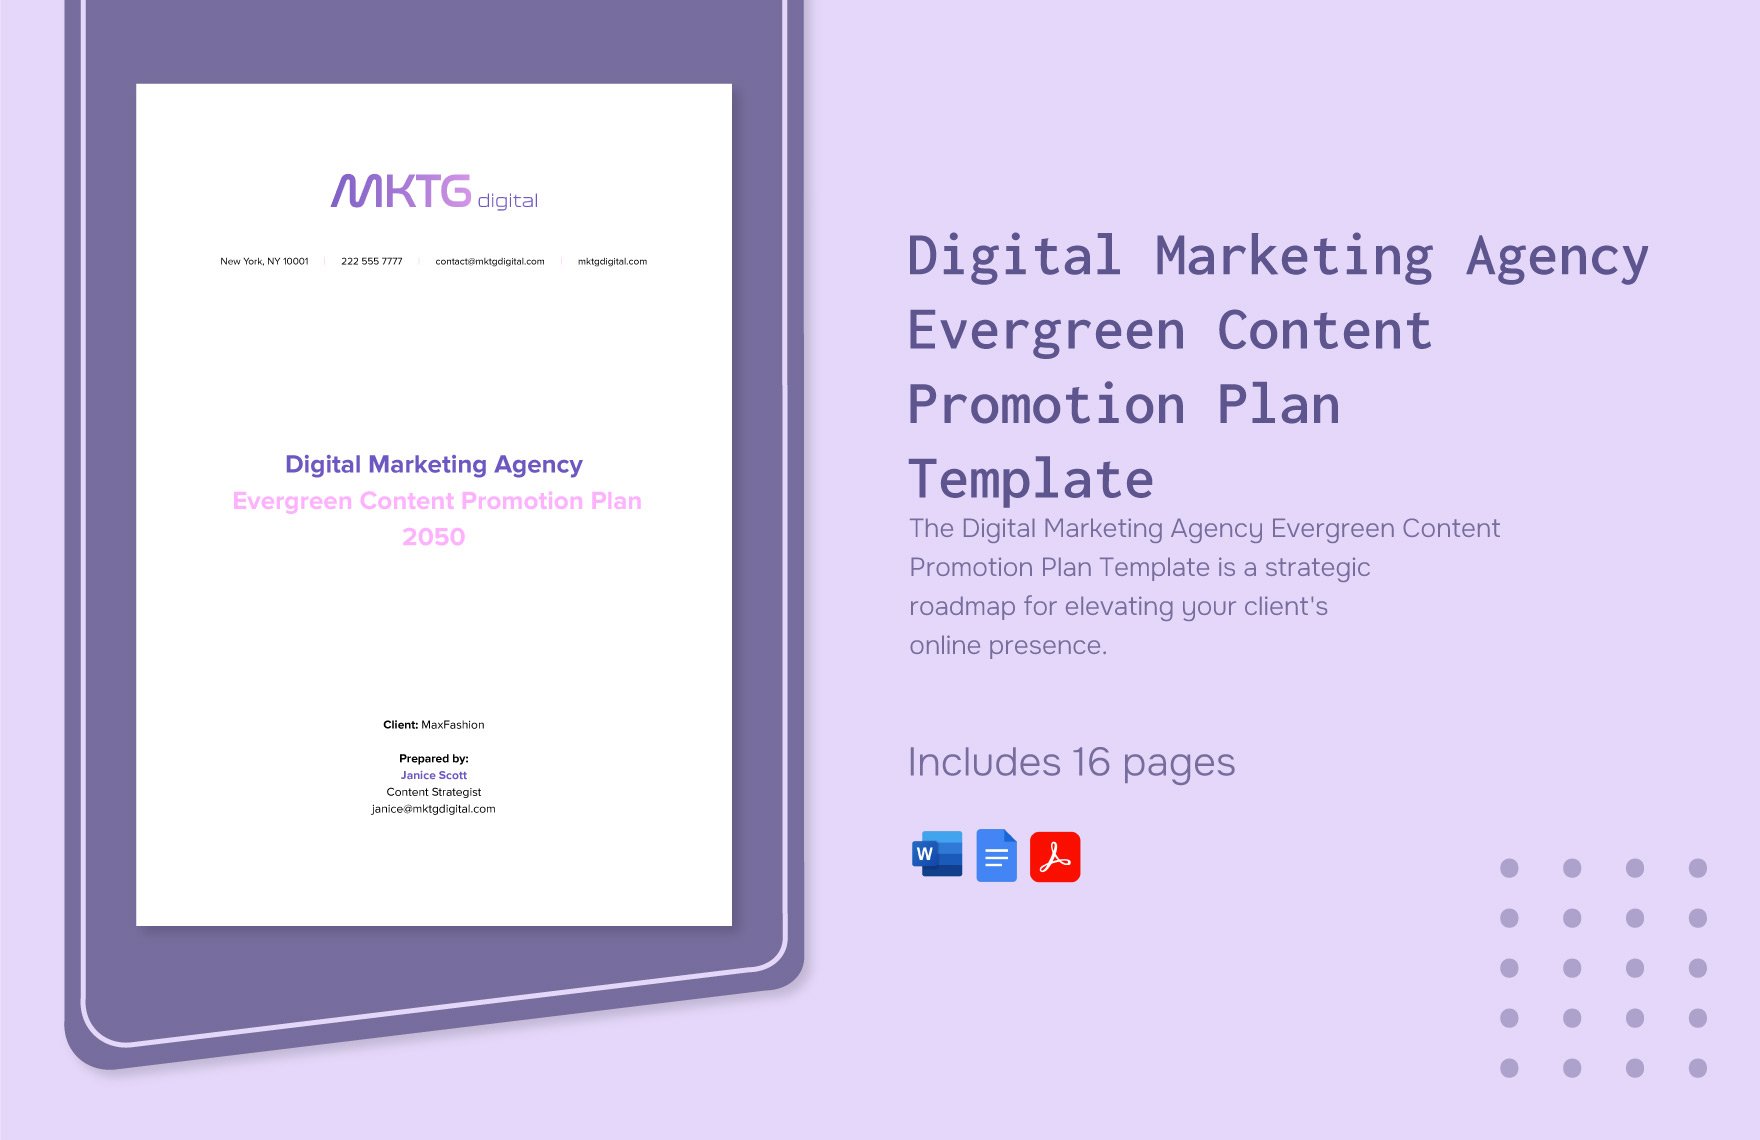 Digital Marketing Agency Evergreen Content Promotion Plan Template